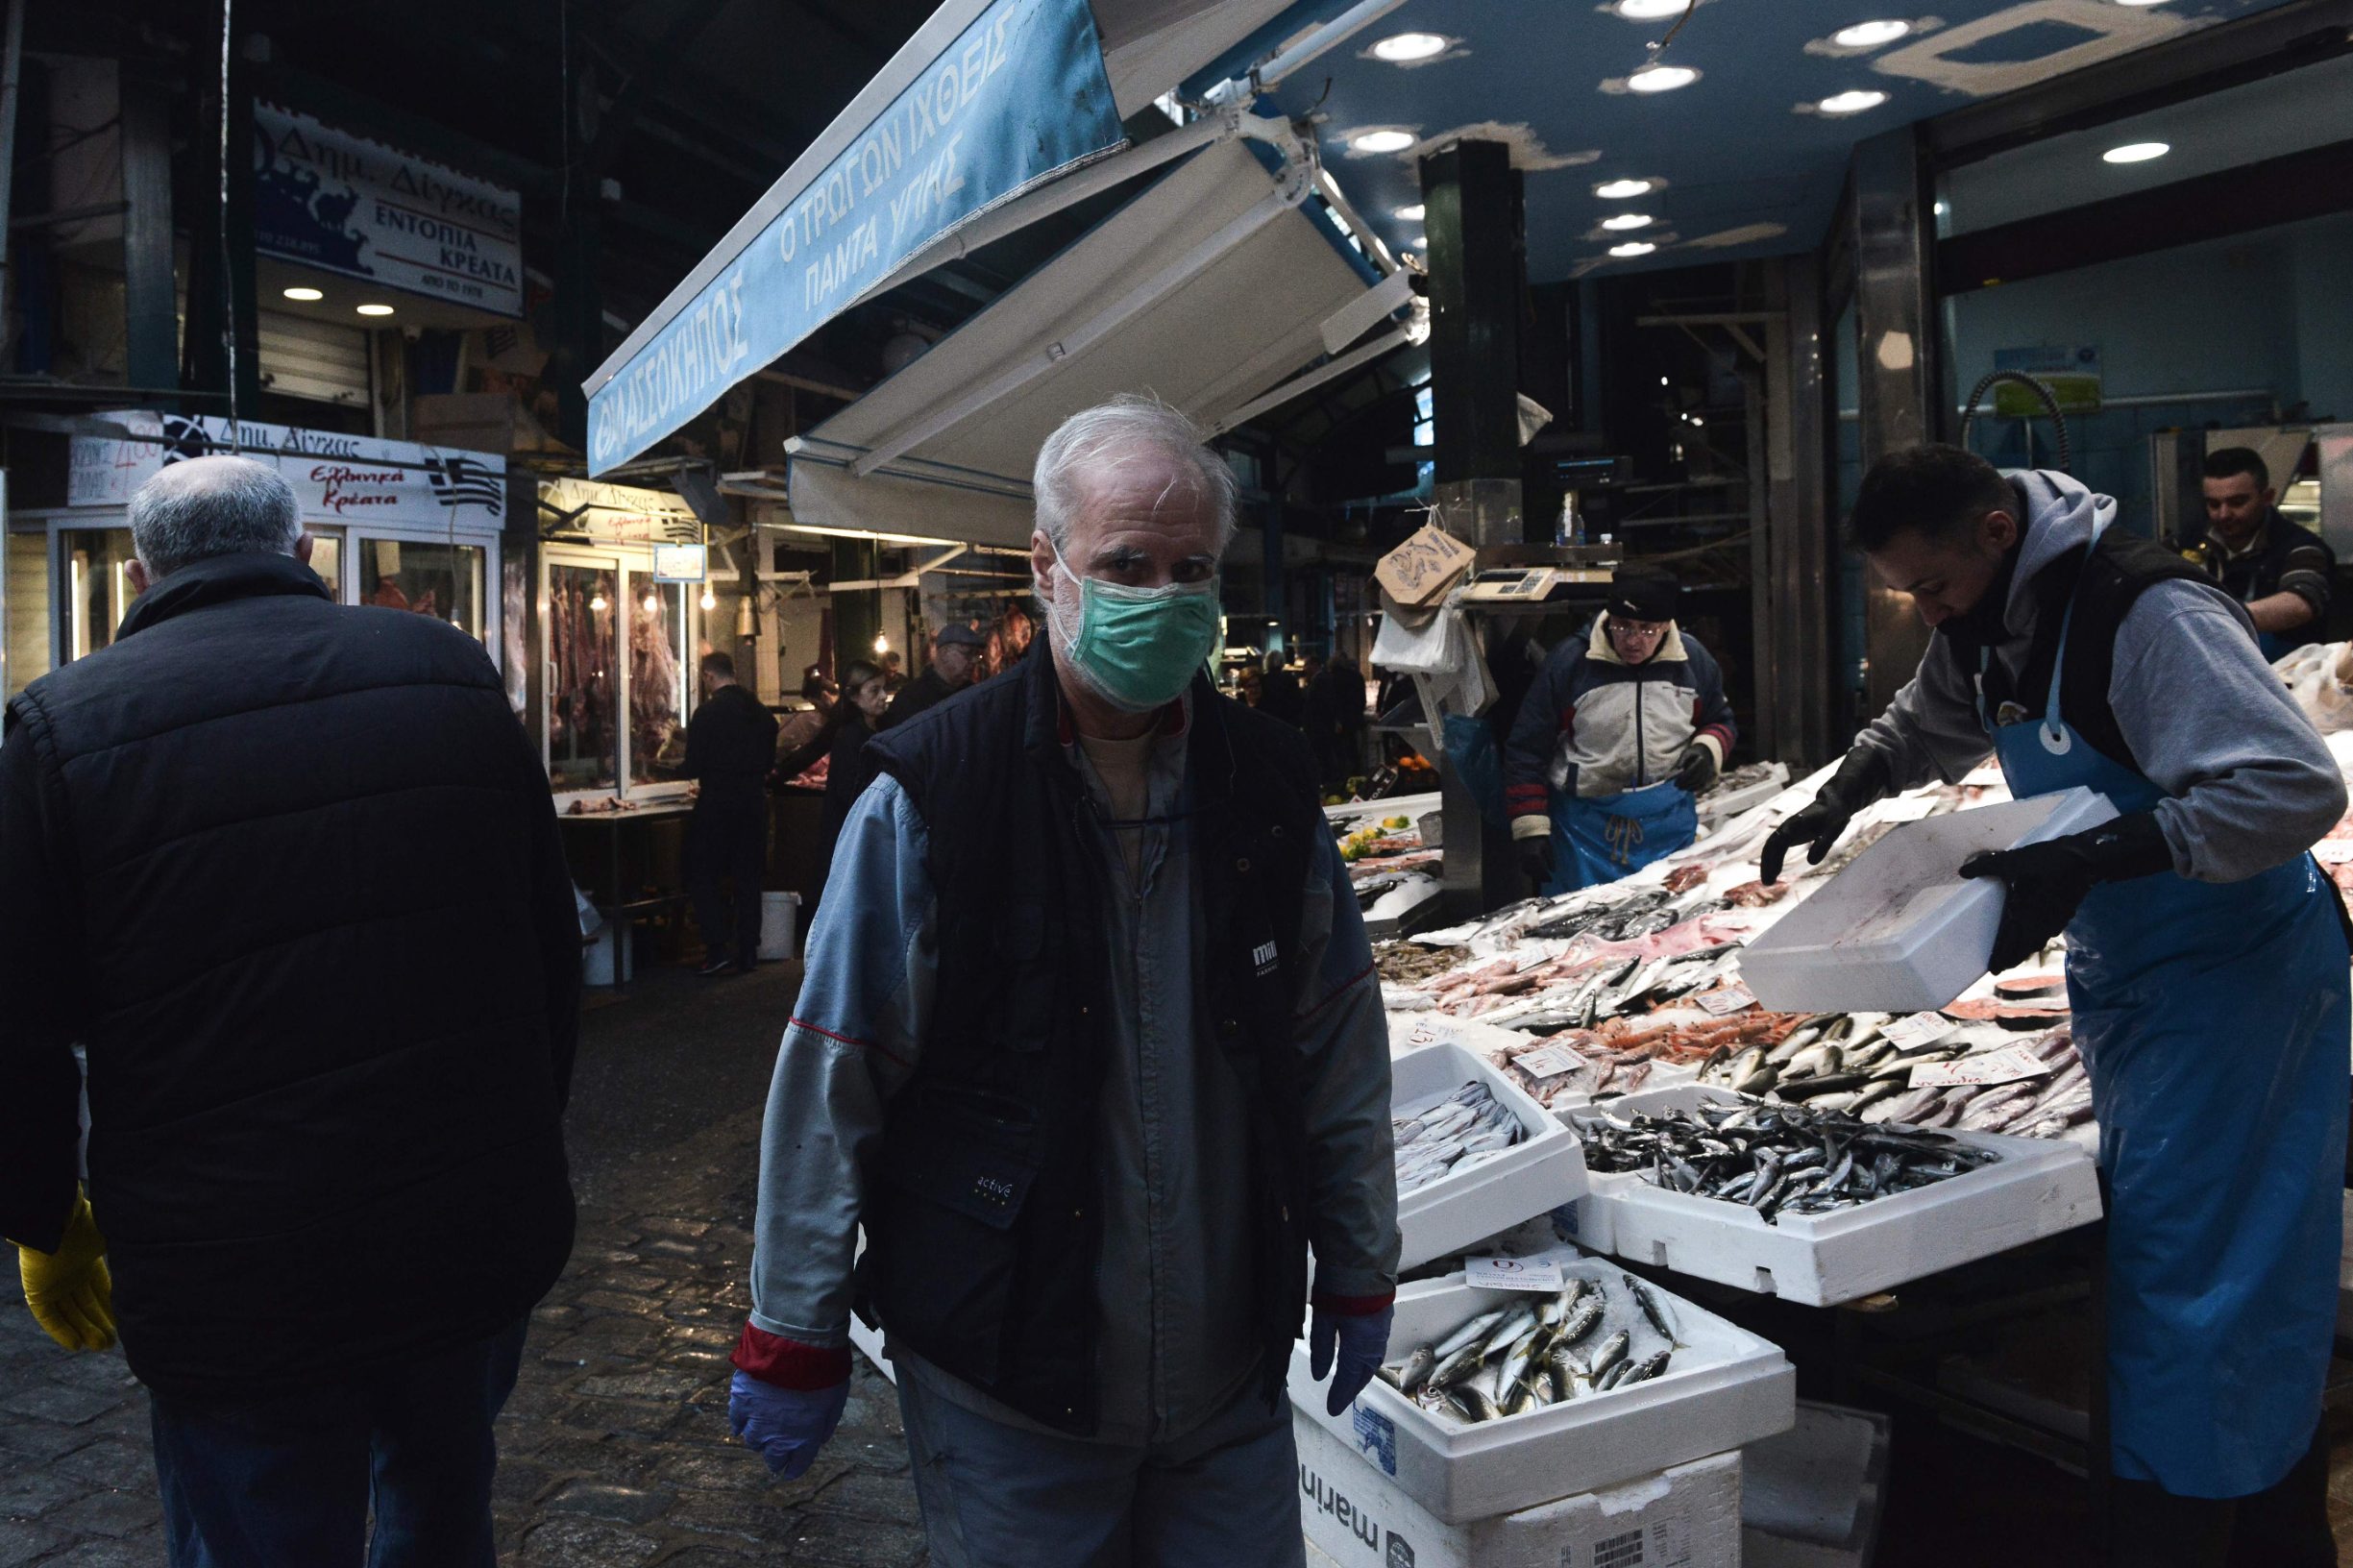 TOPSHOT - A man with a protective mask walks around the Kapani food market, in Thessaloniki on March 14, 2020, amid the measures taken to contain the spread of COVID-19 novel coronavirus. - Greece announced two more coronavirus deaths on March 14, 2020, bringing the toll to three, as an unprecedented lockdown takes effect. (Photo by Sakis MITROLIDIS / AFP)